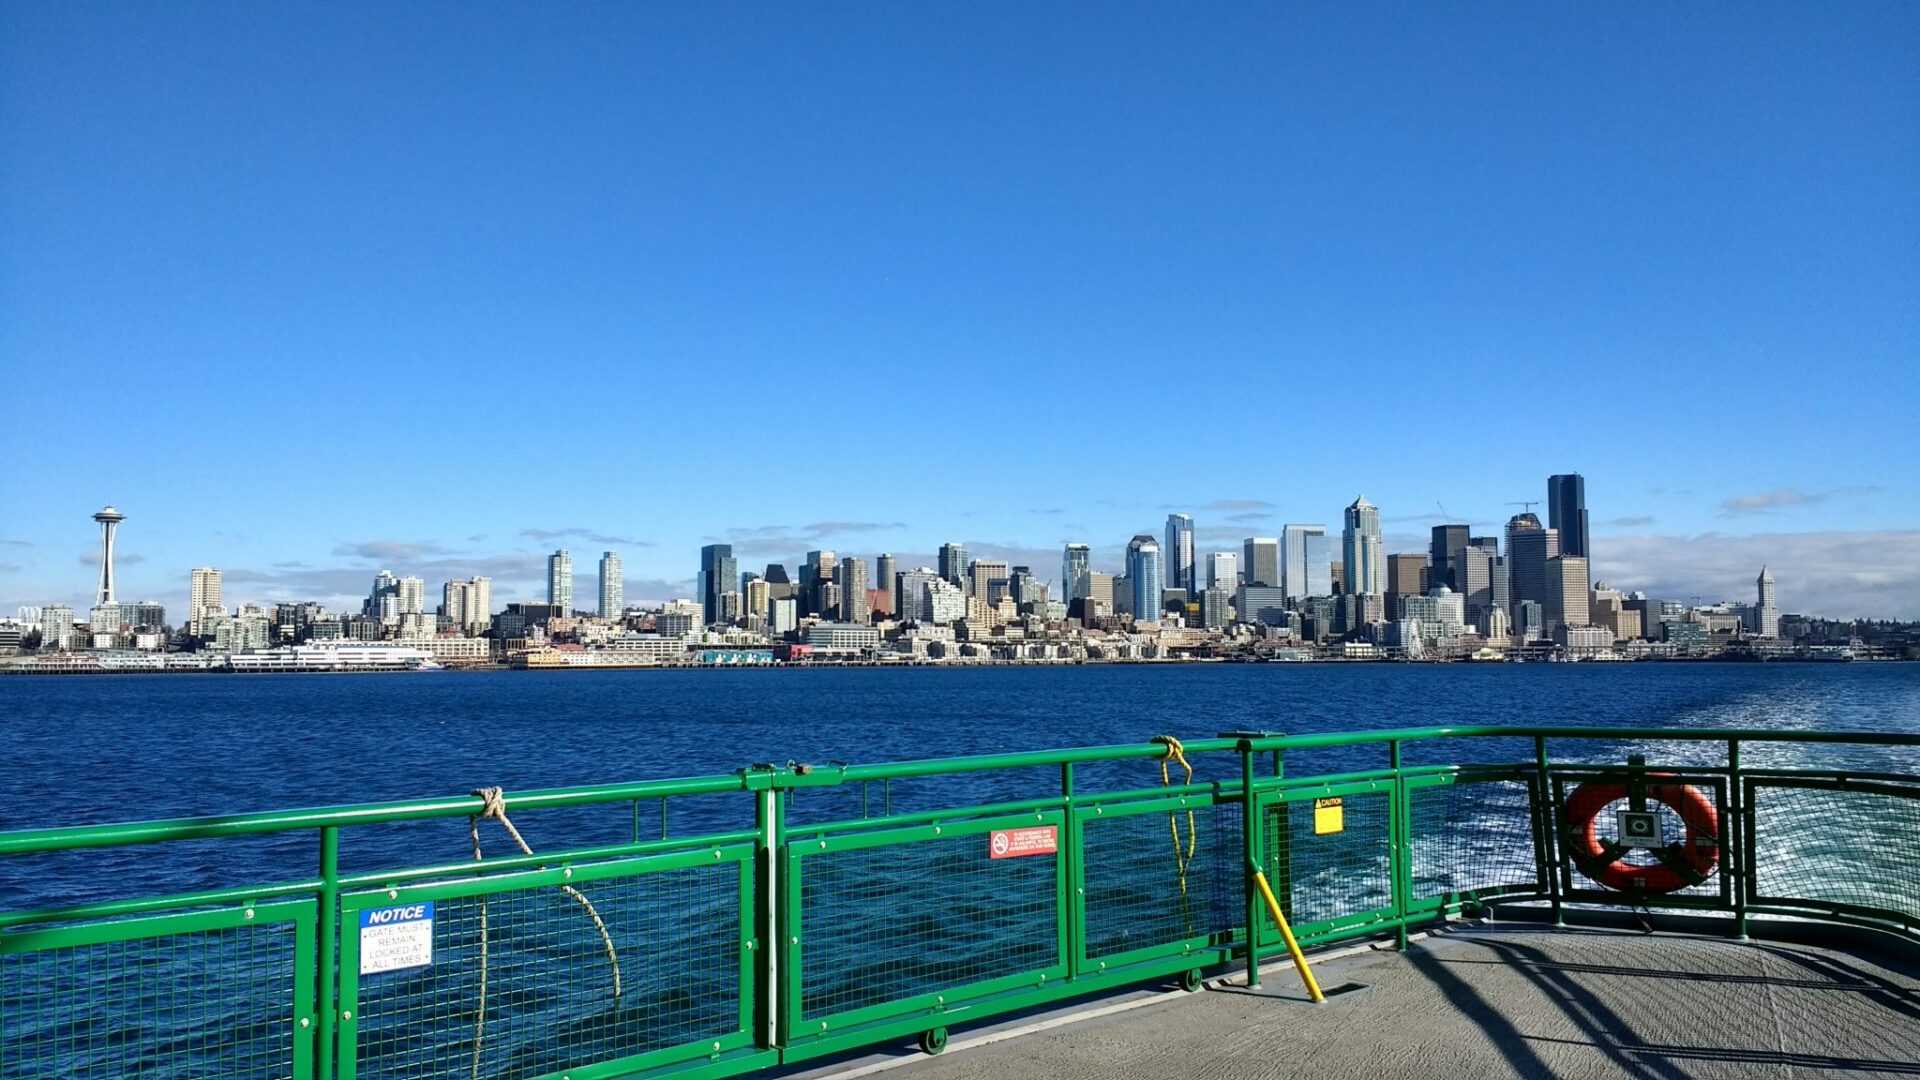 The Seattle city skyline from the ferry. The deck of the ferry is in the foreground. The ferry is a popular day trip from Seattle